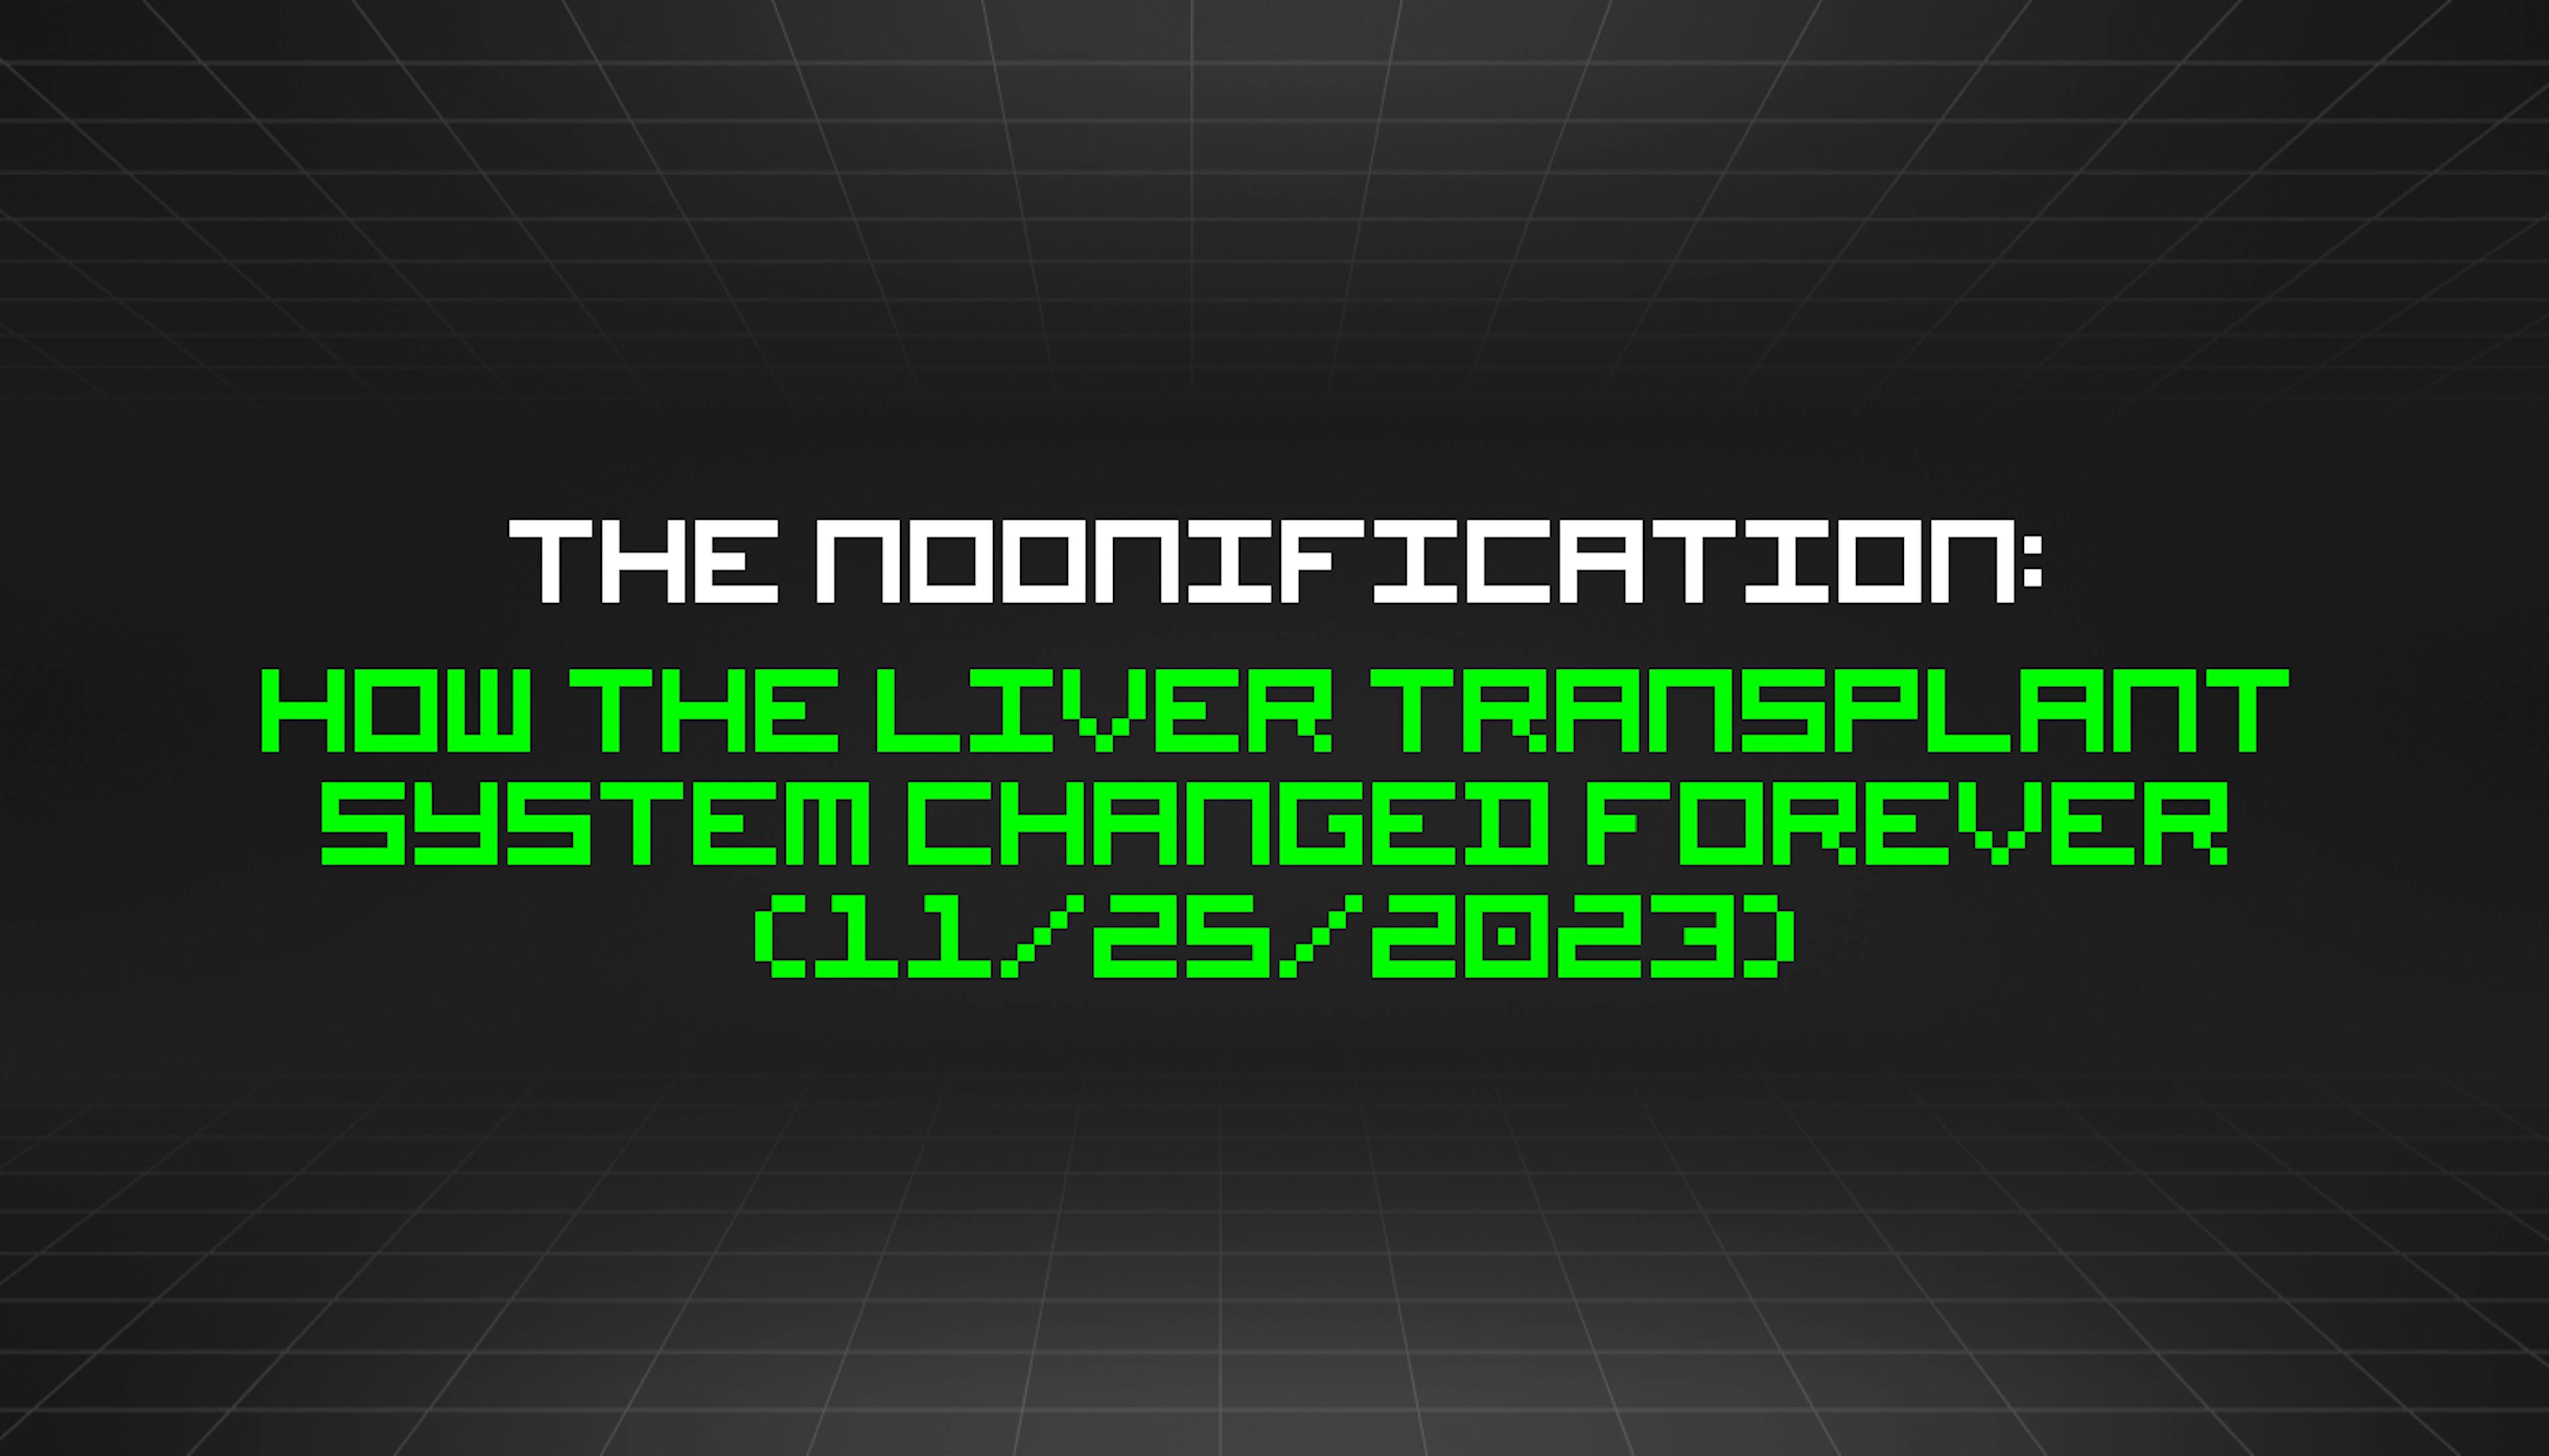 featured image - The Noonification: How the Liver Transplant System Changed Forever (11/25/2023)